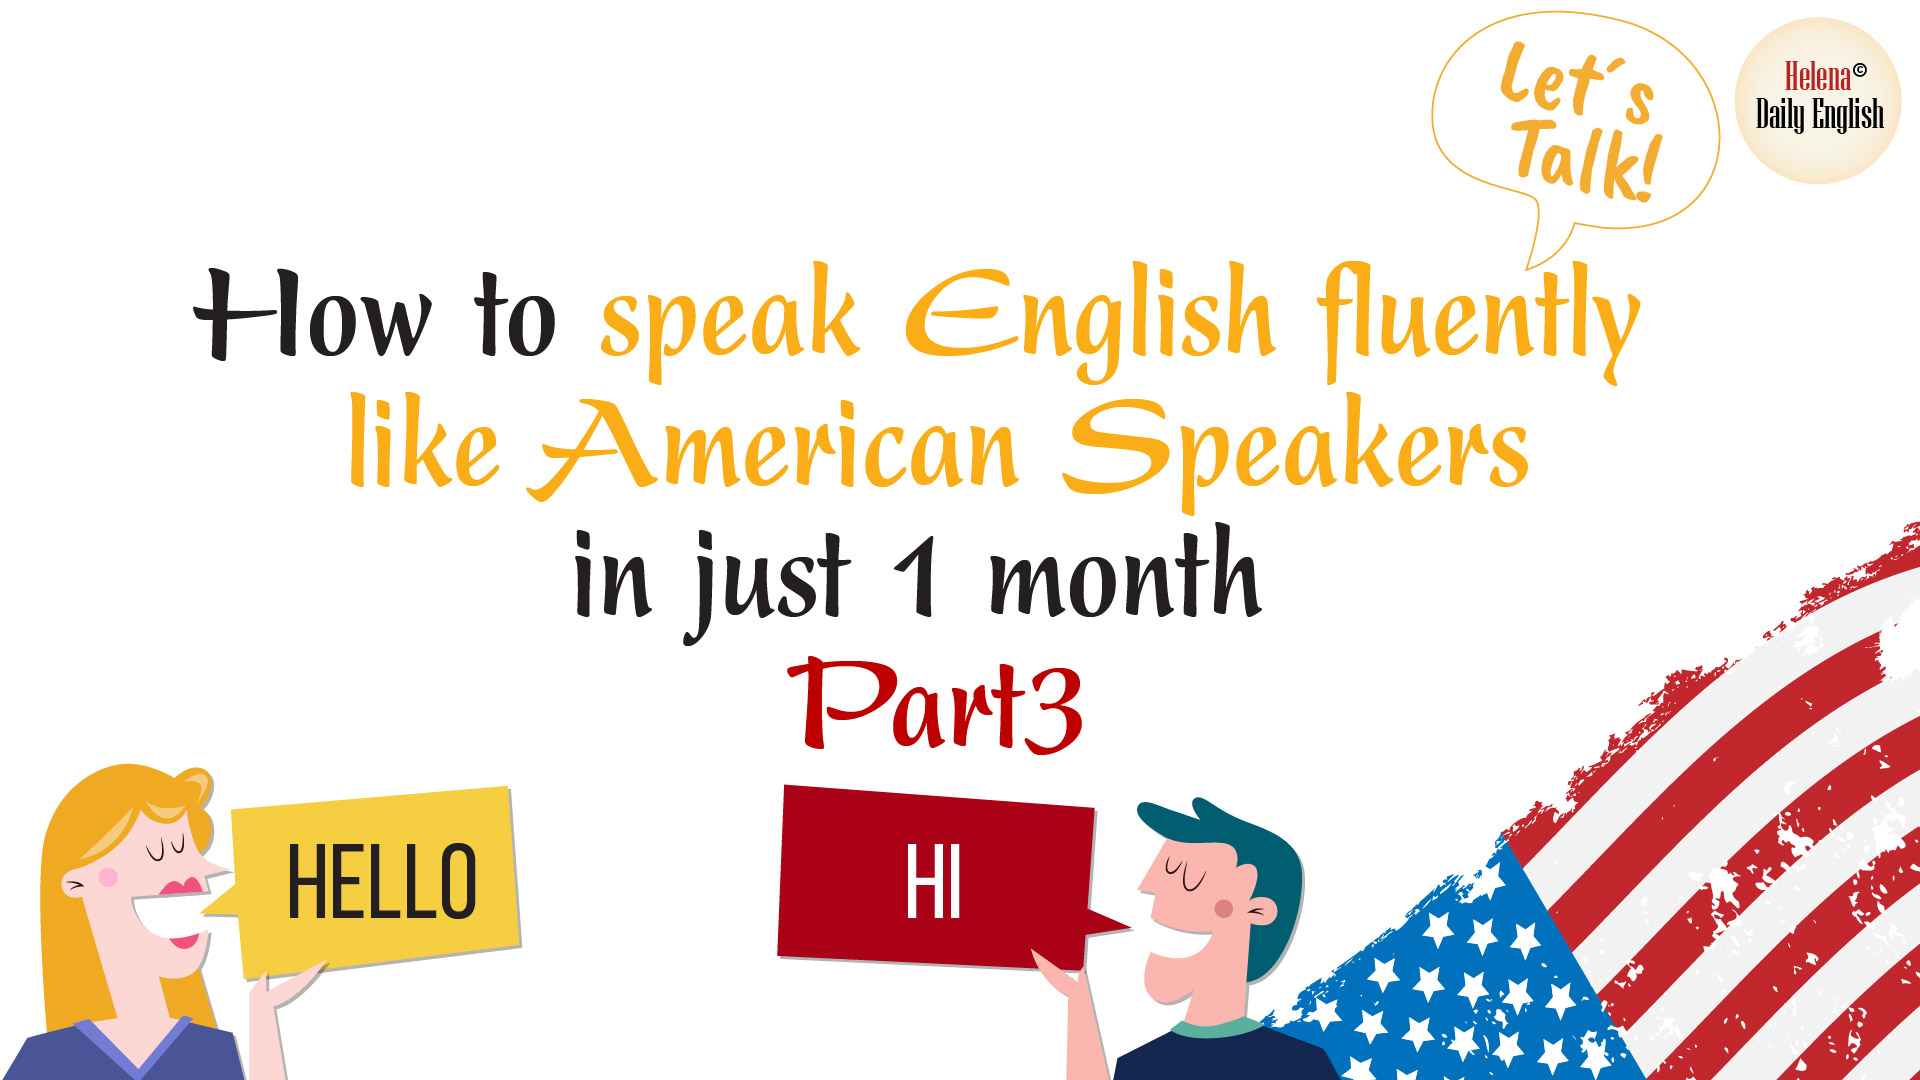 How to Speak English Fluently, How to Speak English like an American